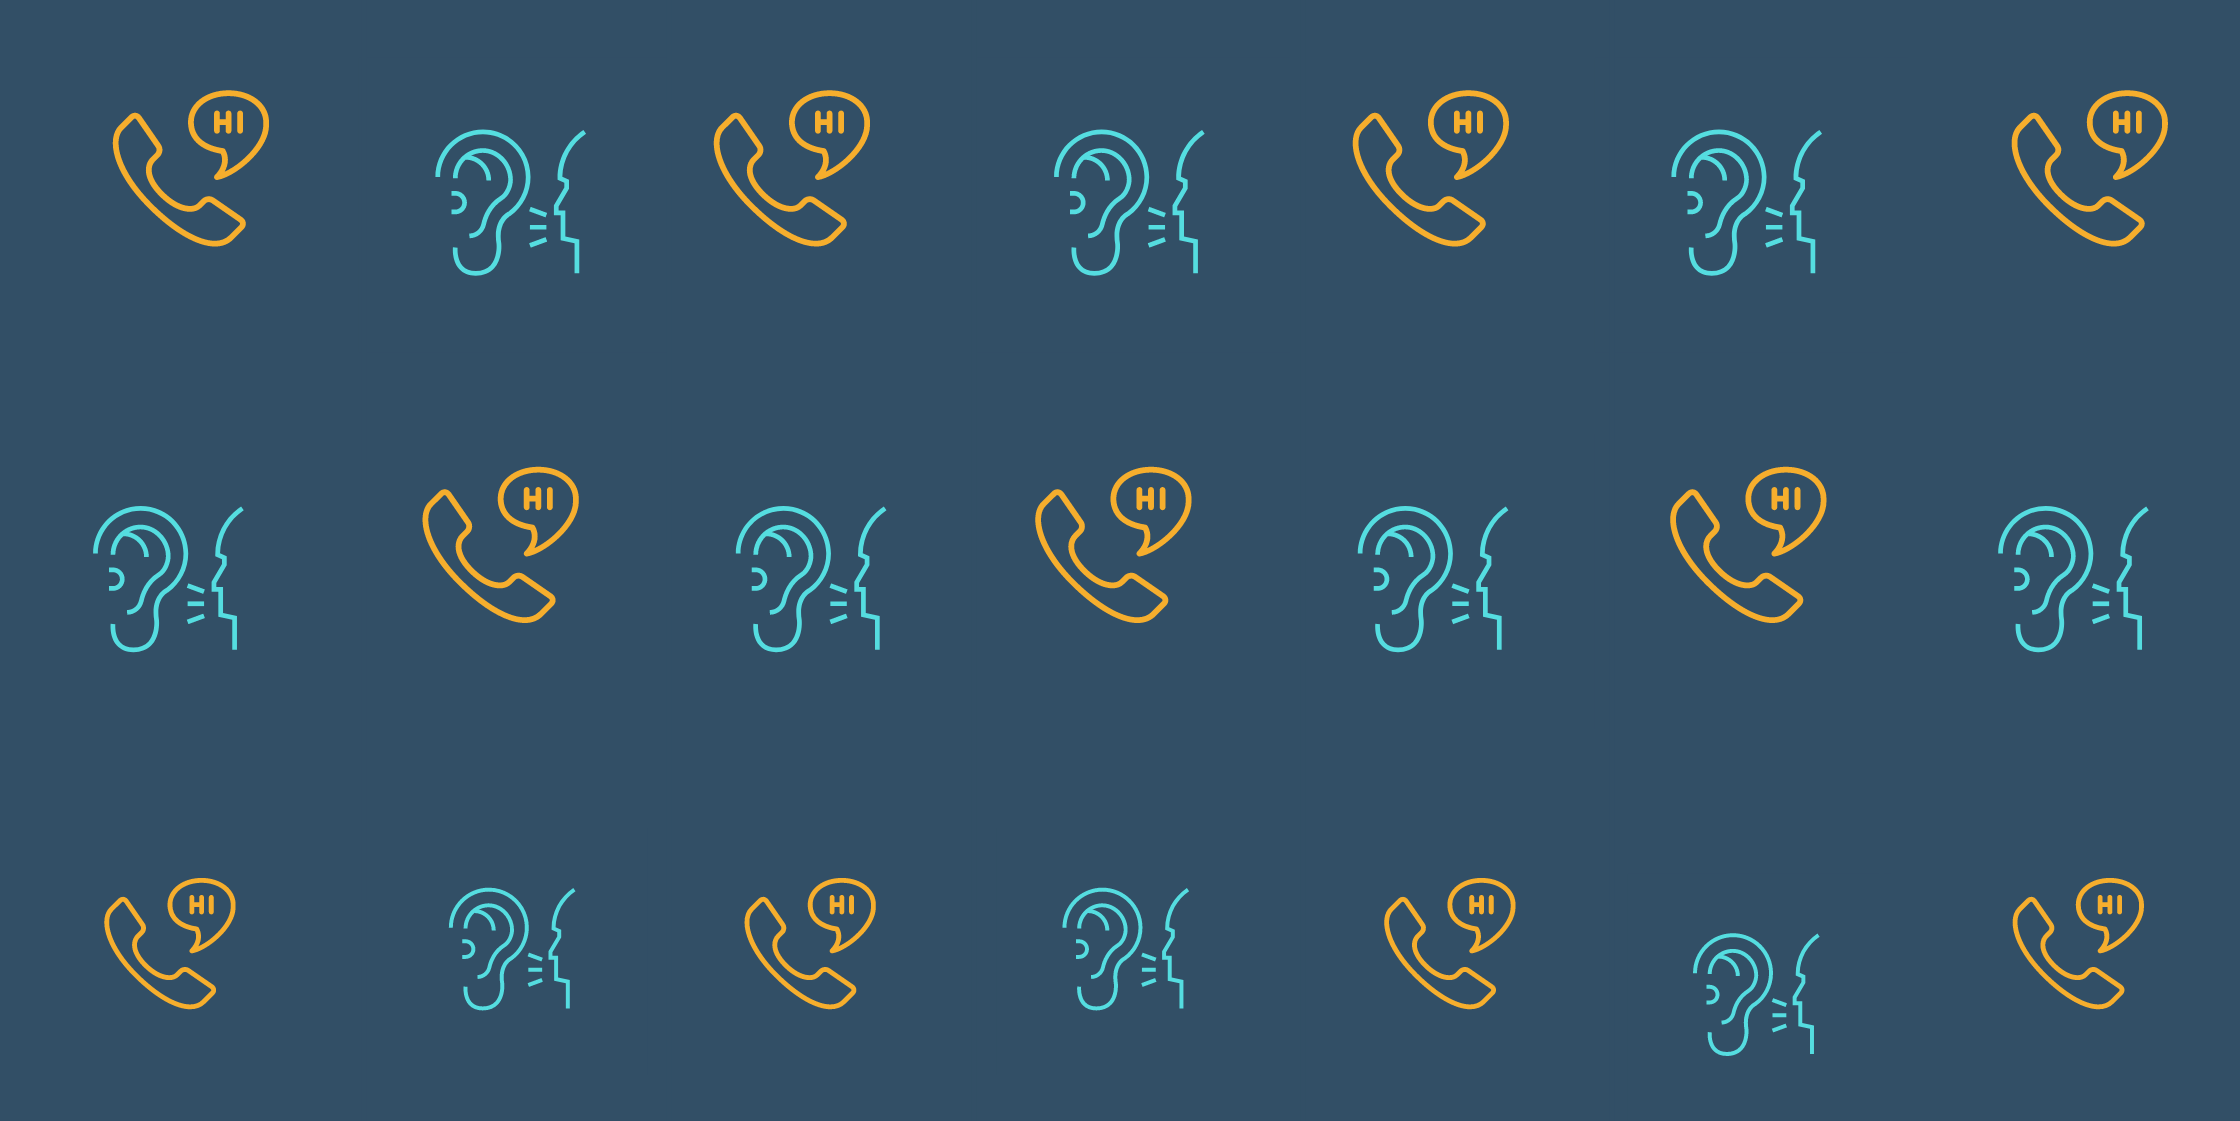 Icons representing someone listening and someone speaking on the phone